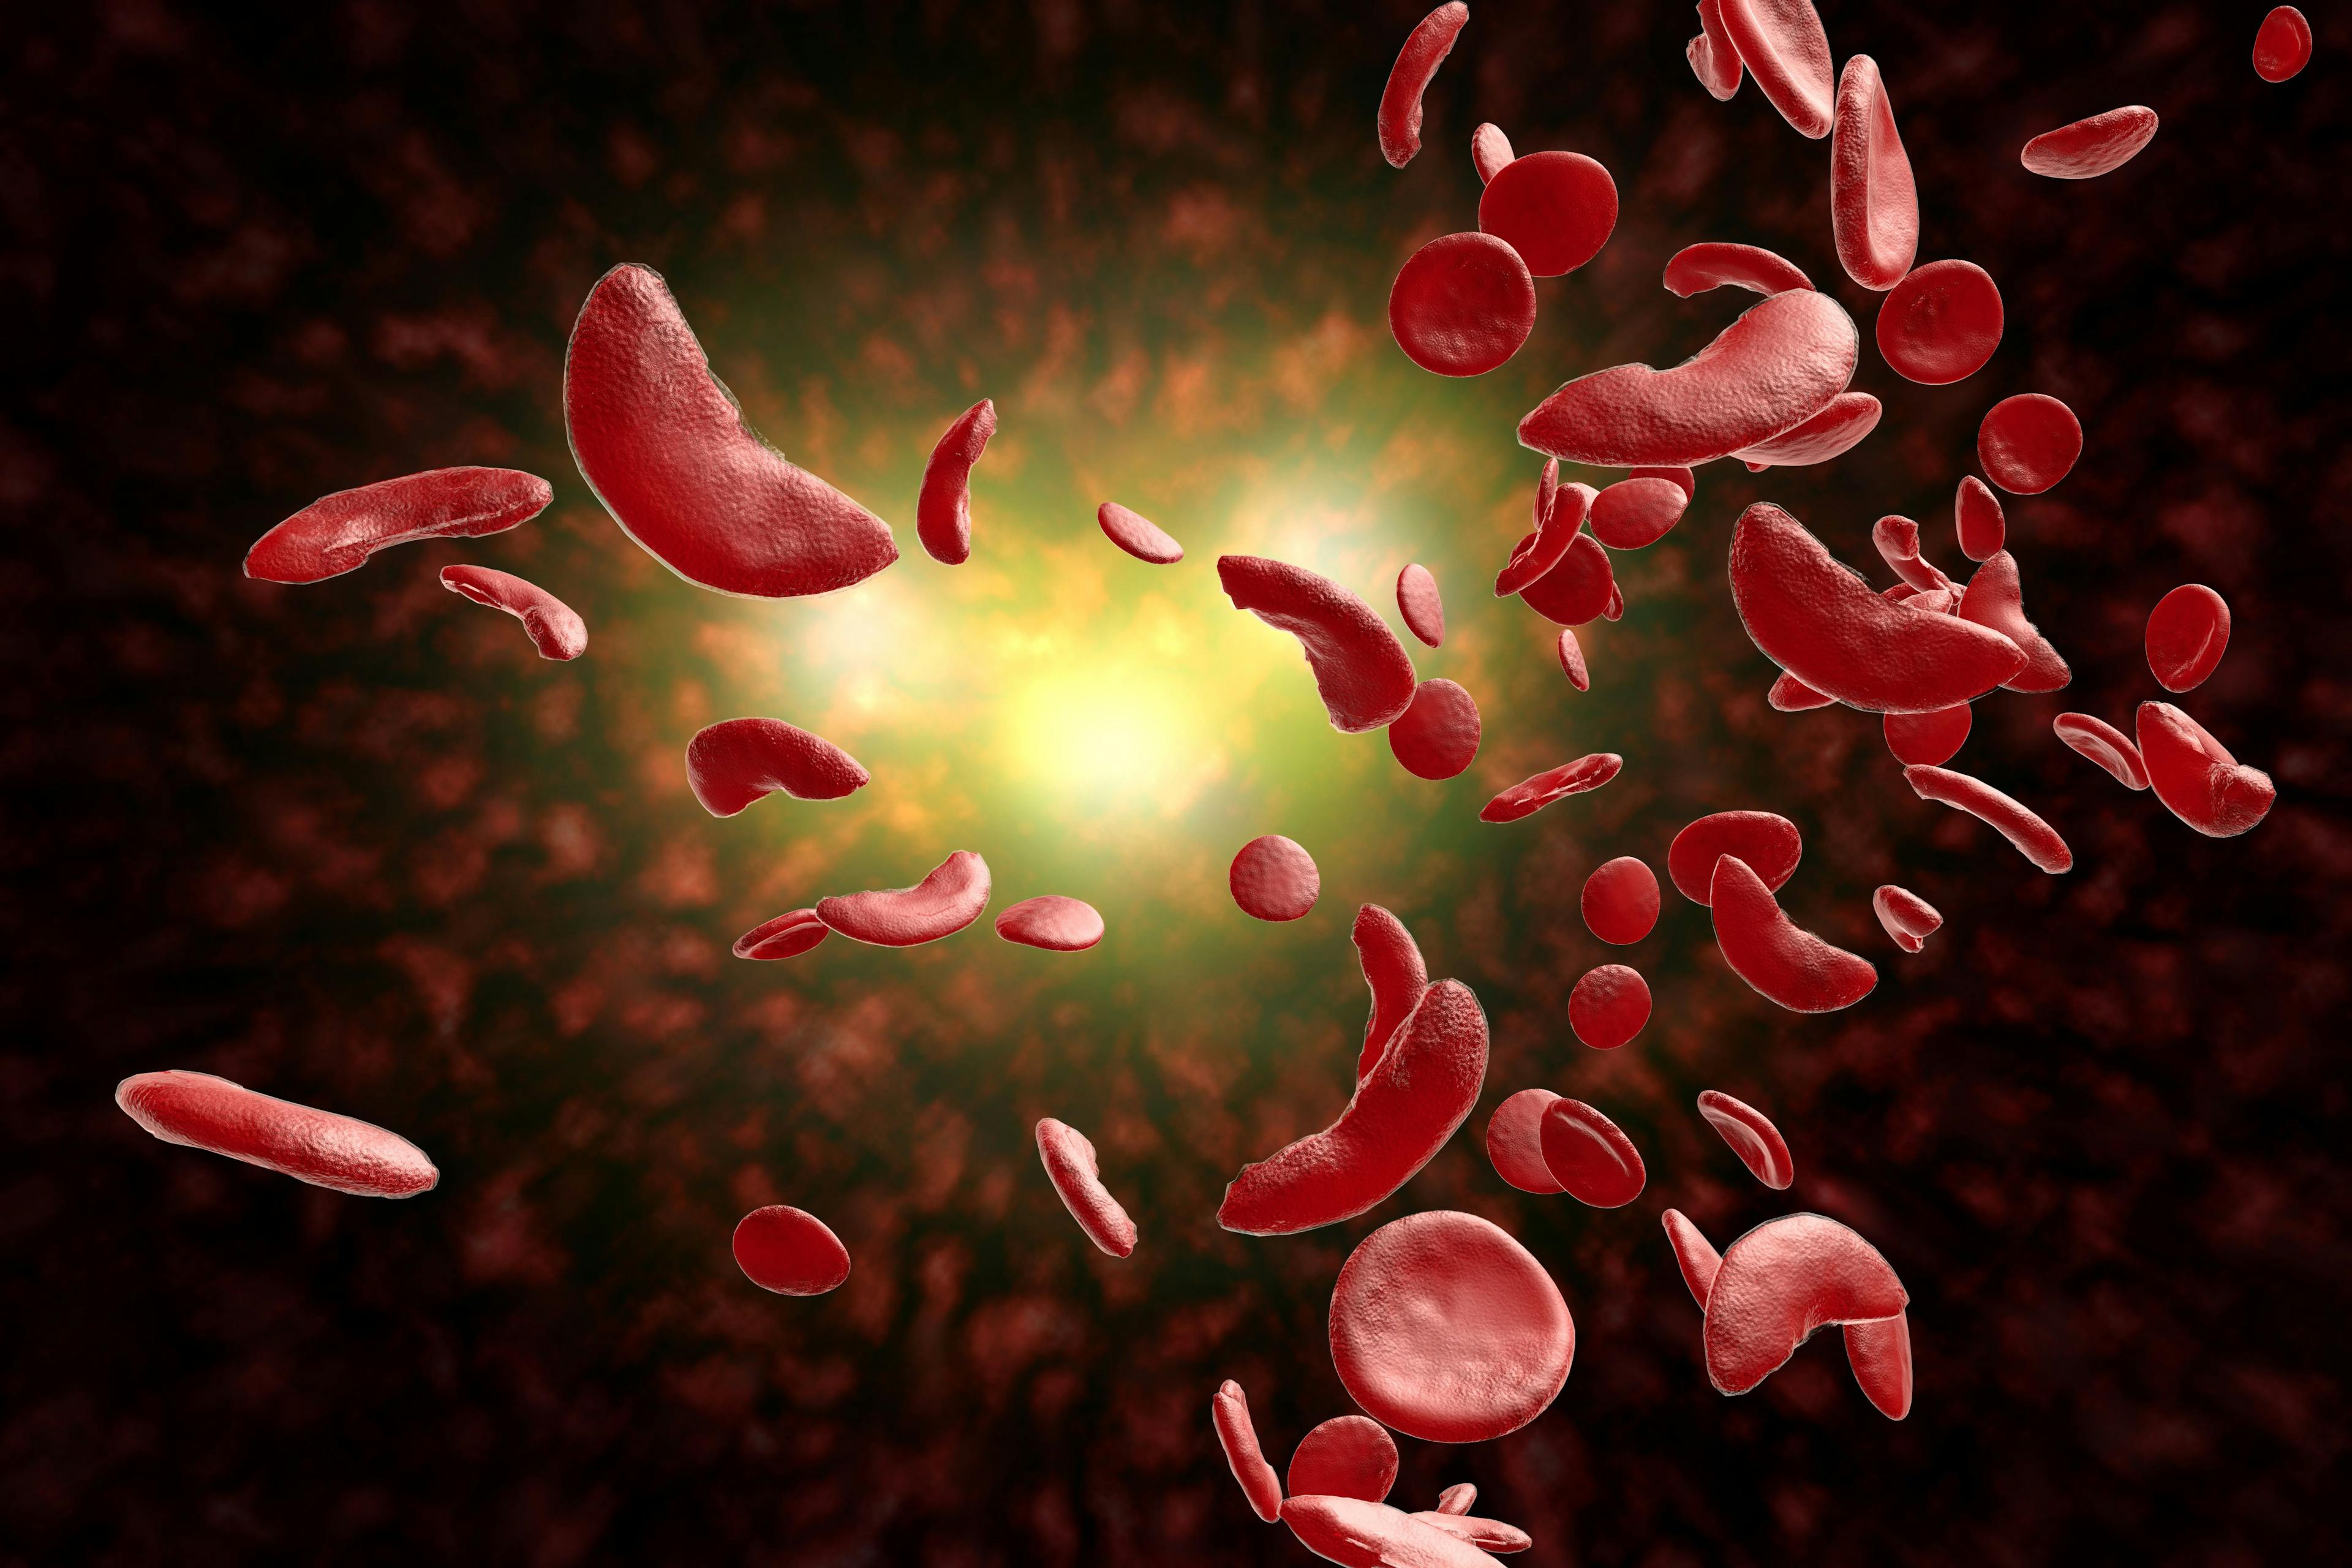 Sickle cell disease red blood cells -- Image credit: Ezume Images | stock.adobe.com